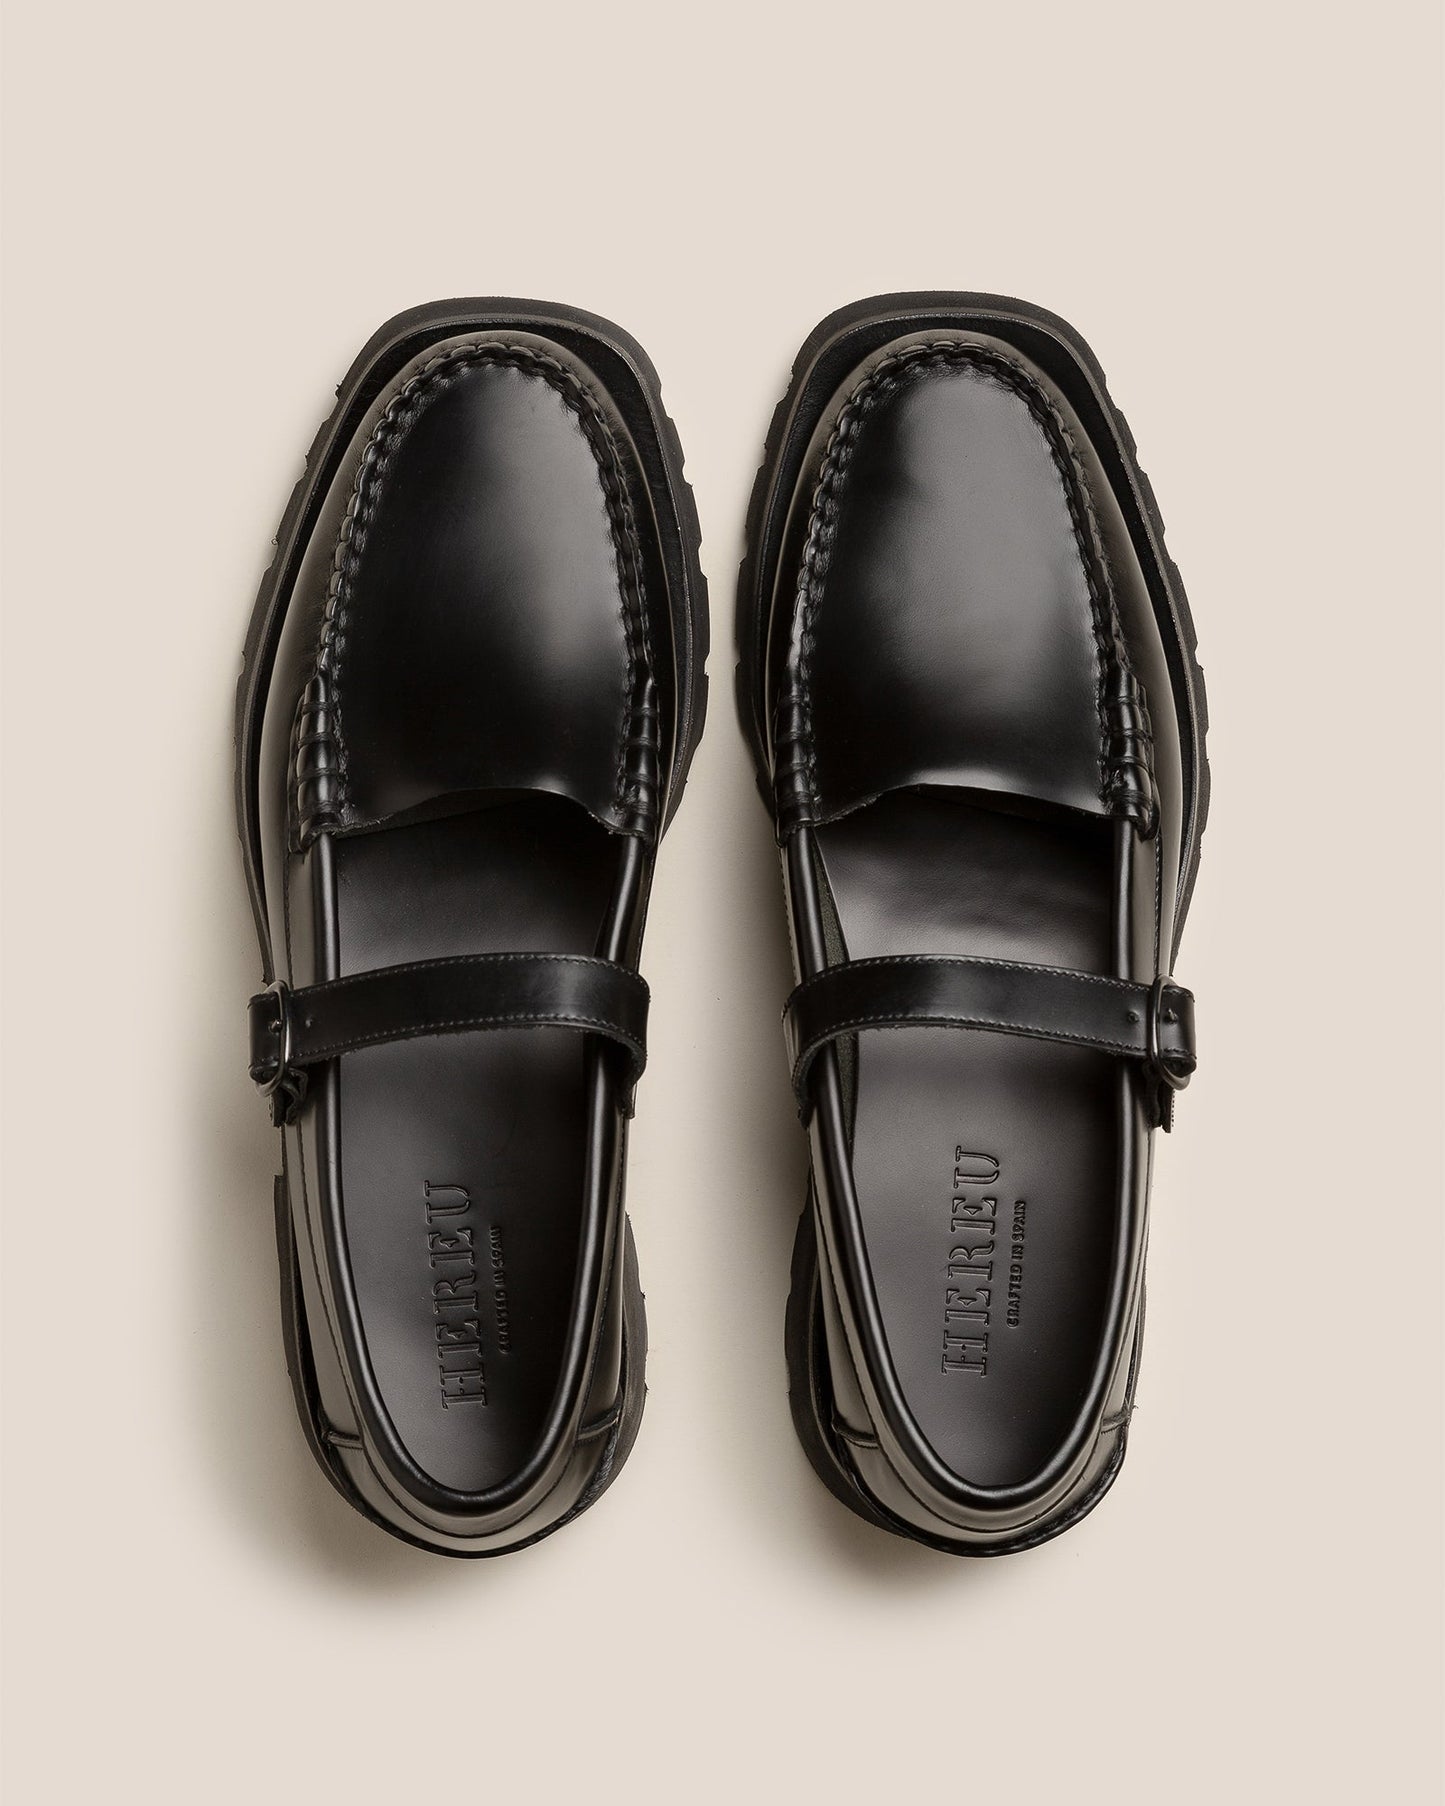 BLANQUER SPORT - Mary Jane Tread Sole Loafer